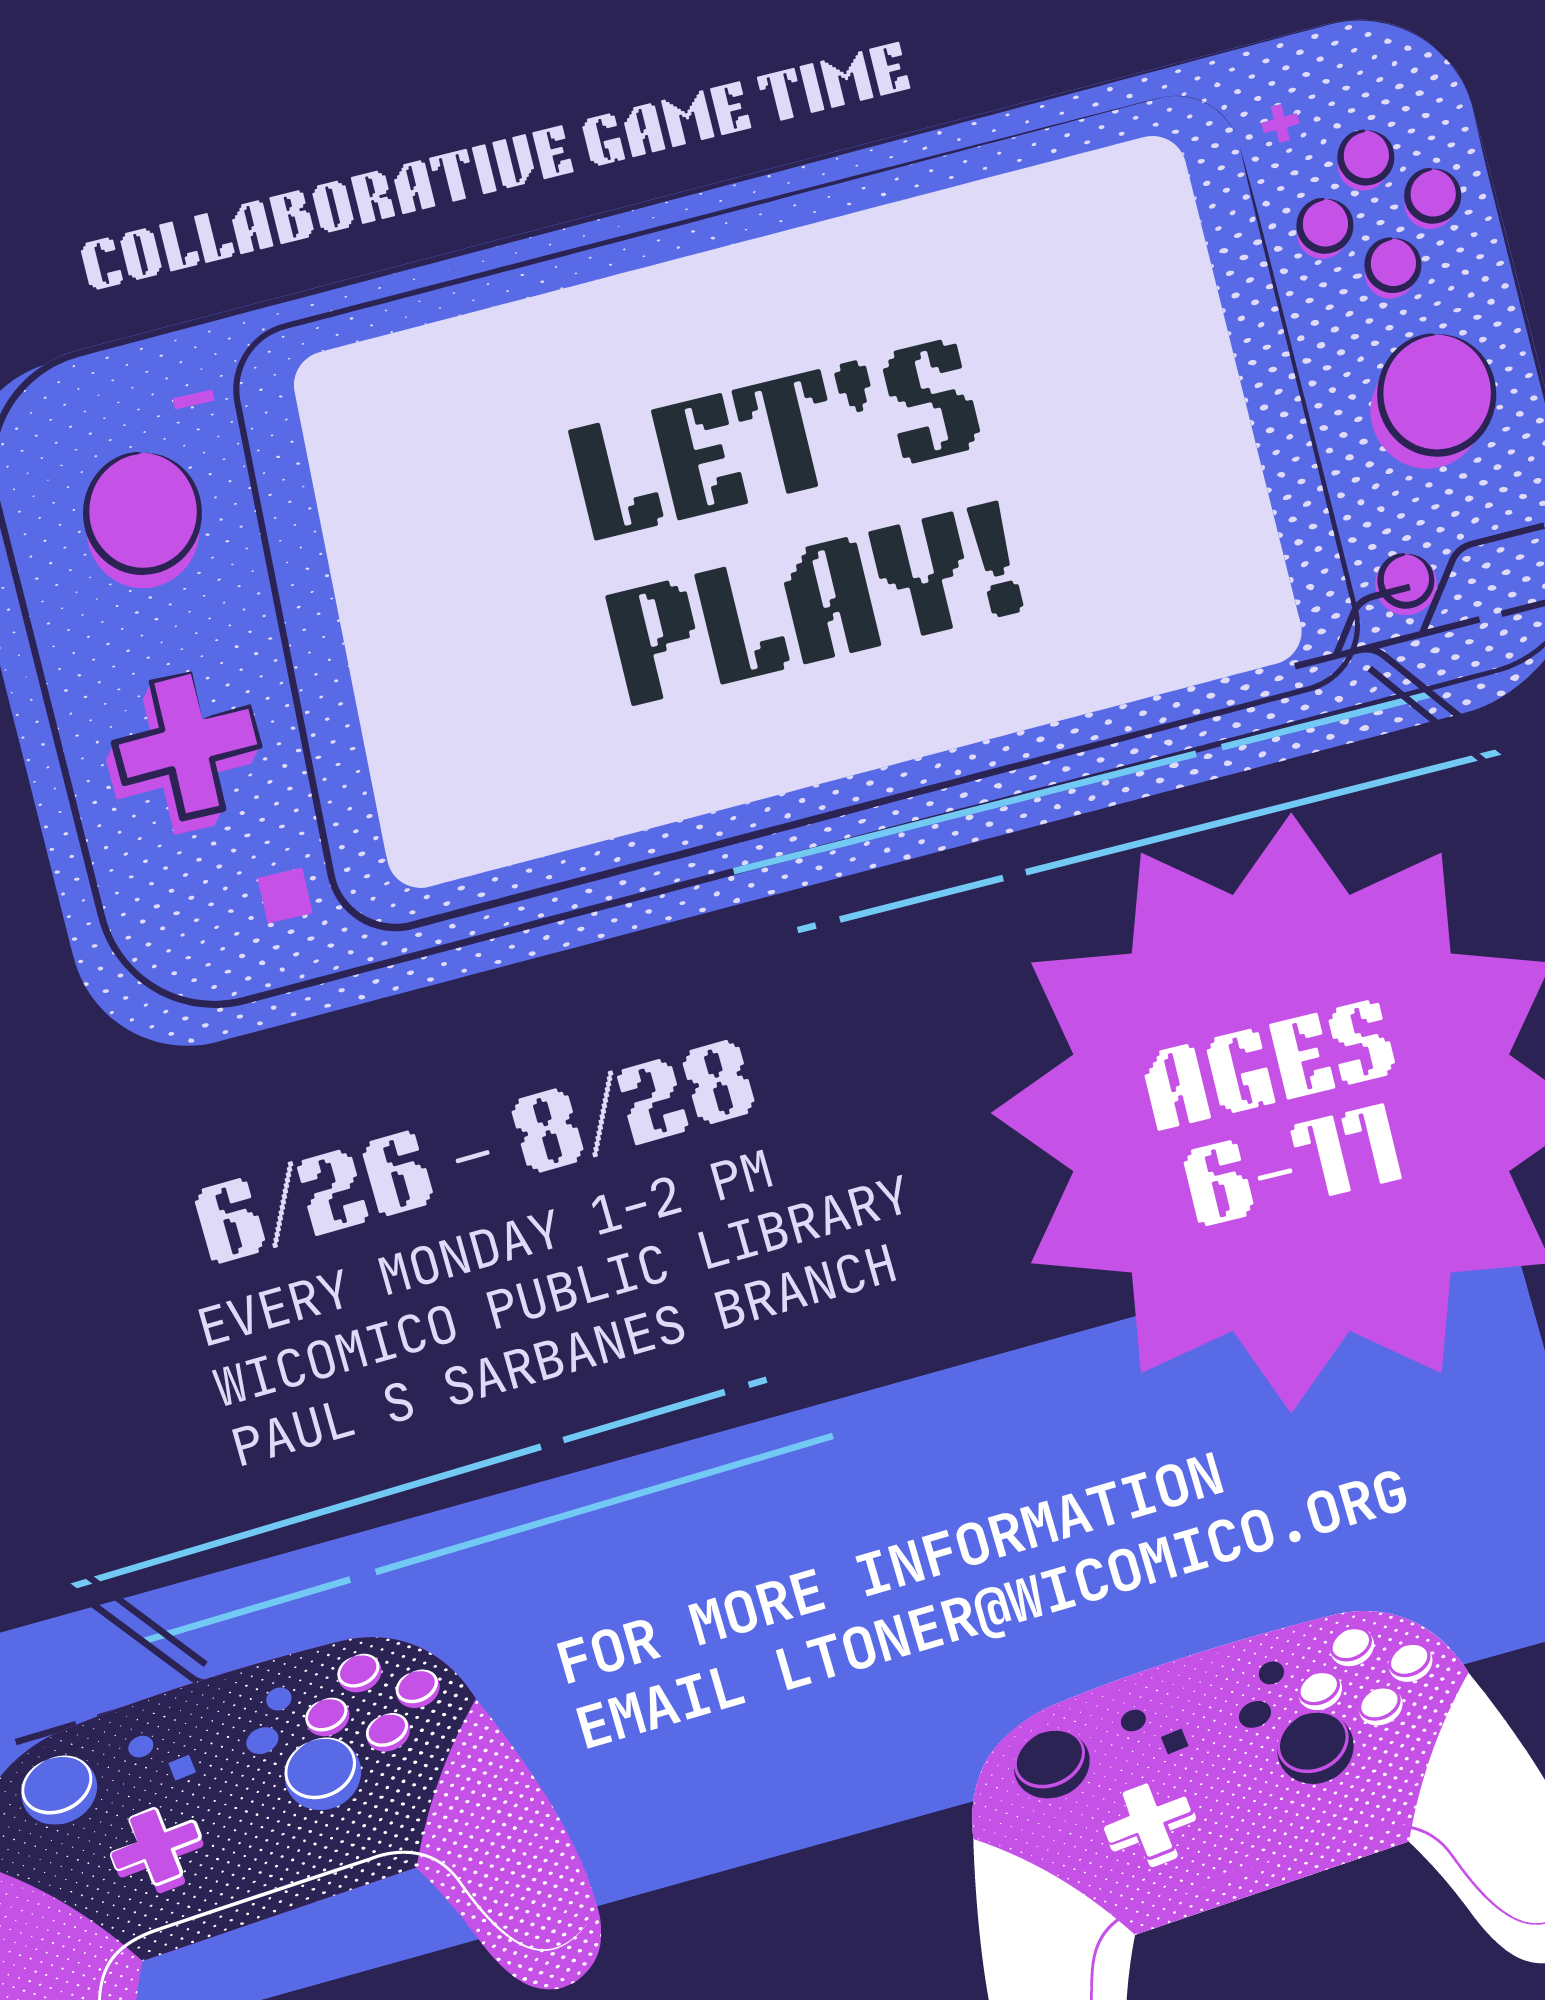 flyer with video game controllers. text reads "collaborative game time. let's play! 6/28 - 8/28. every monday 1-2 pm. wicomico public library. paul s sarbanes branch. ages 6-11. for more information email ltoner@wicomico.org."